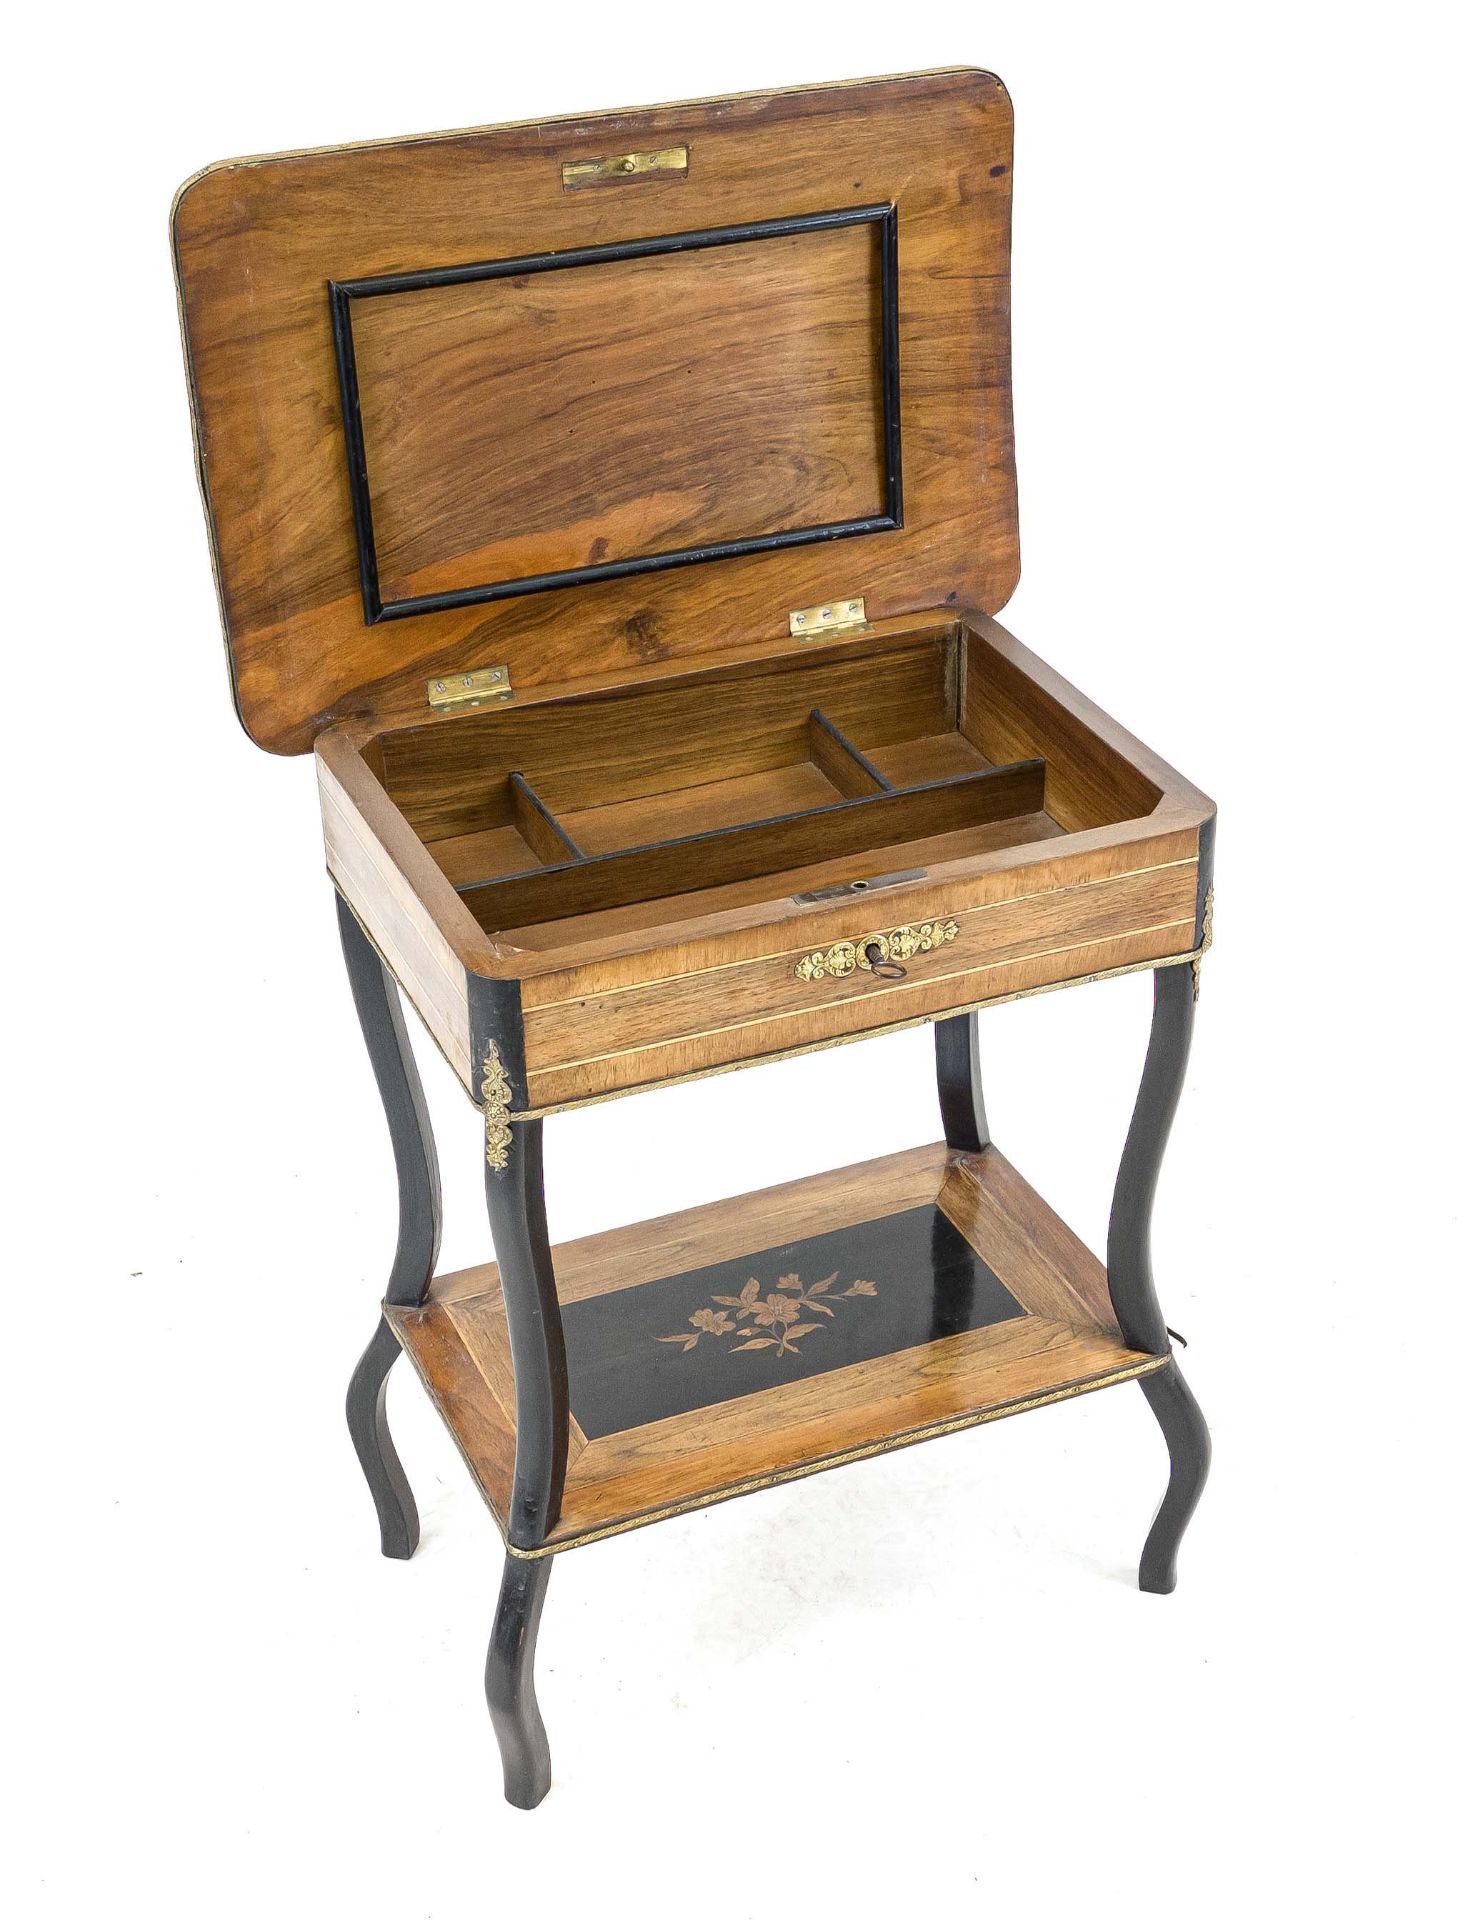 Handicraft/sewing table, 19th century, walnut and other precious woods veneered and inlaid, curved - Image 2 of 2